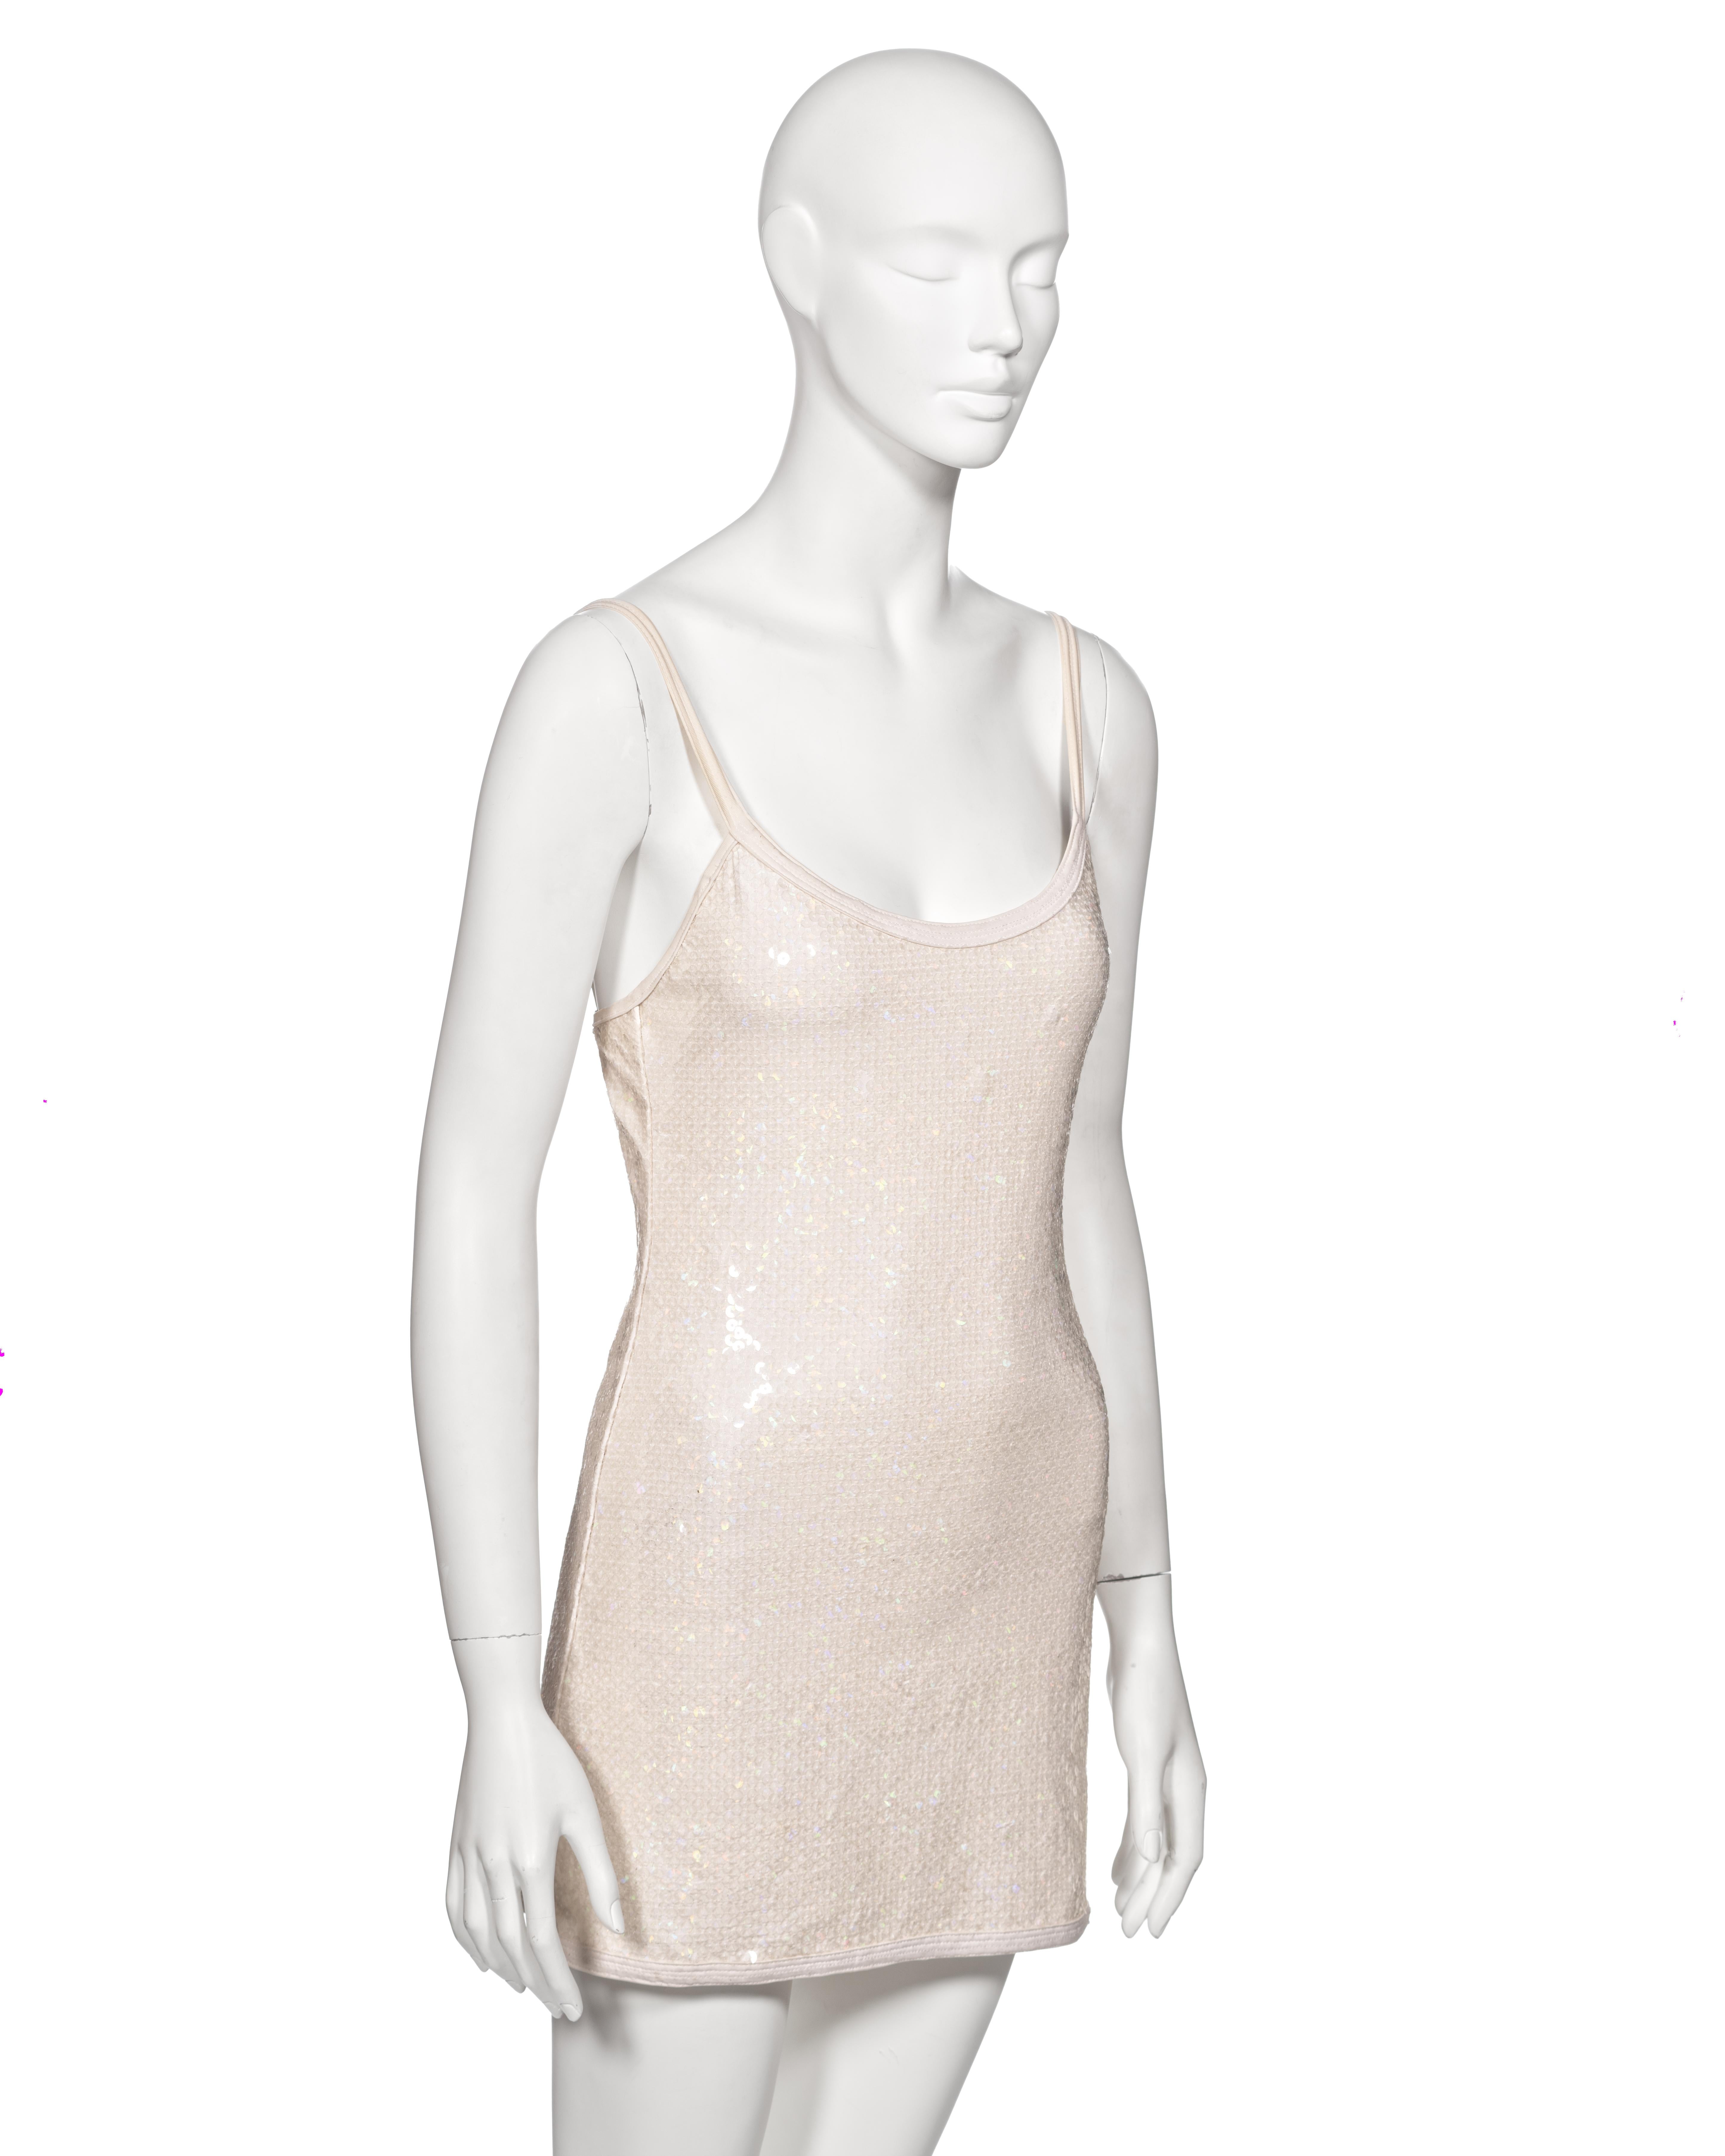 Chanel by Karl Lagerfeld White Iridescent Sequin Mini Dress, ss 2005 1